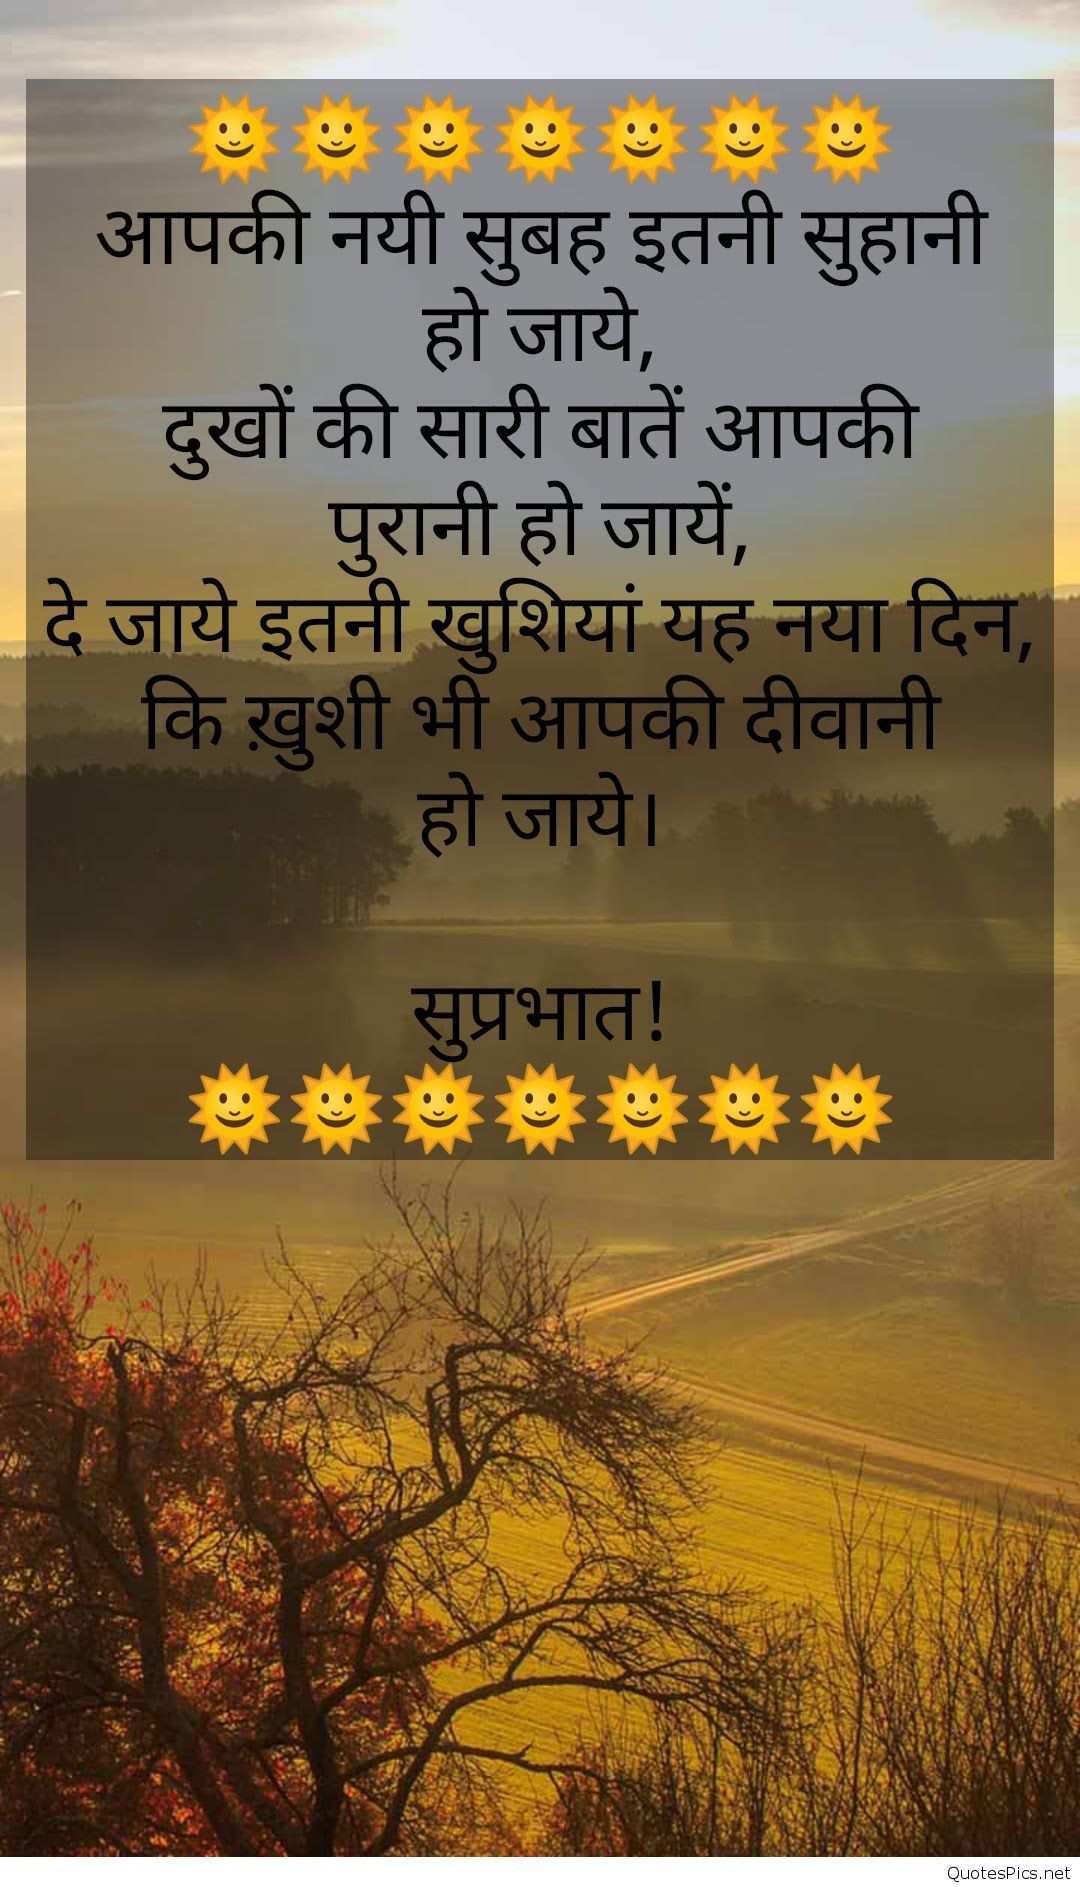 Good Morning Quotes In Hindi Images Wallpaper Photos - Good Morning Wallpaper With Hindi Quotes , HD Wallpaper & Backgrounds